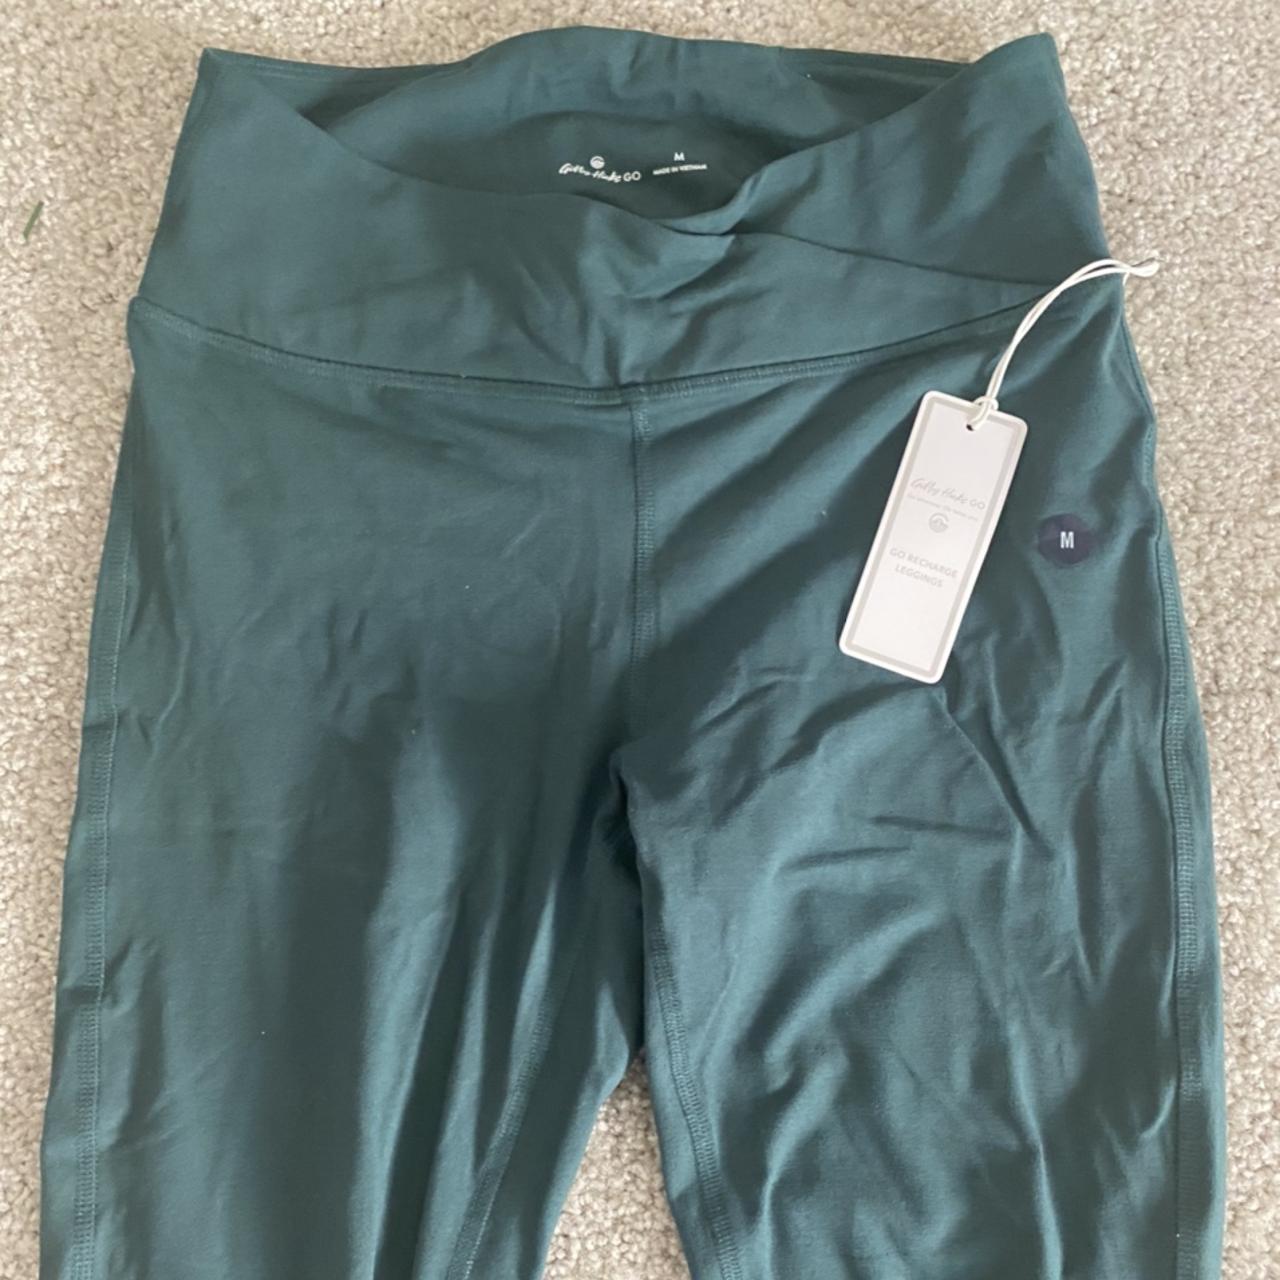 NWT* Gilly Hicks Go Recharge Leggings GIVES... - Depop